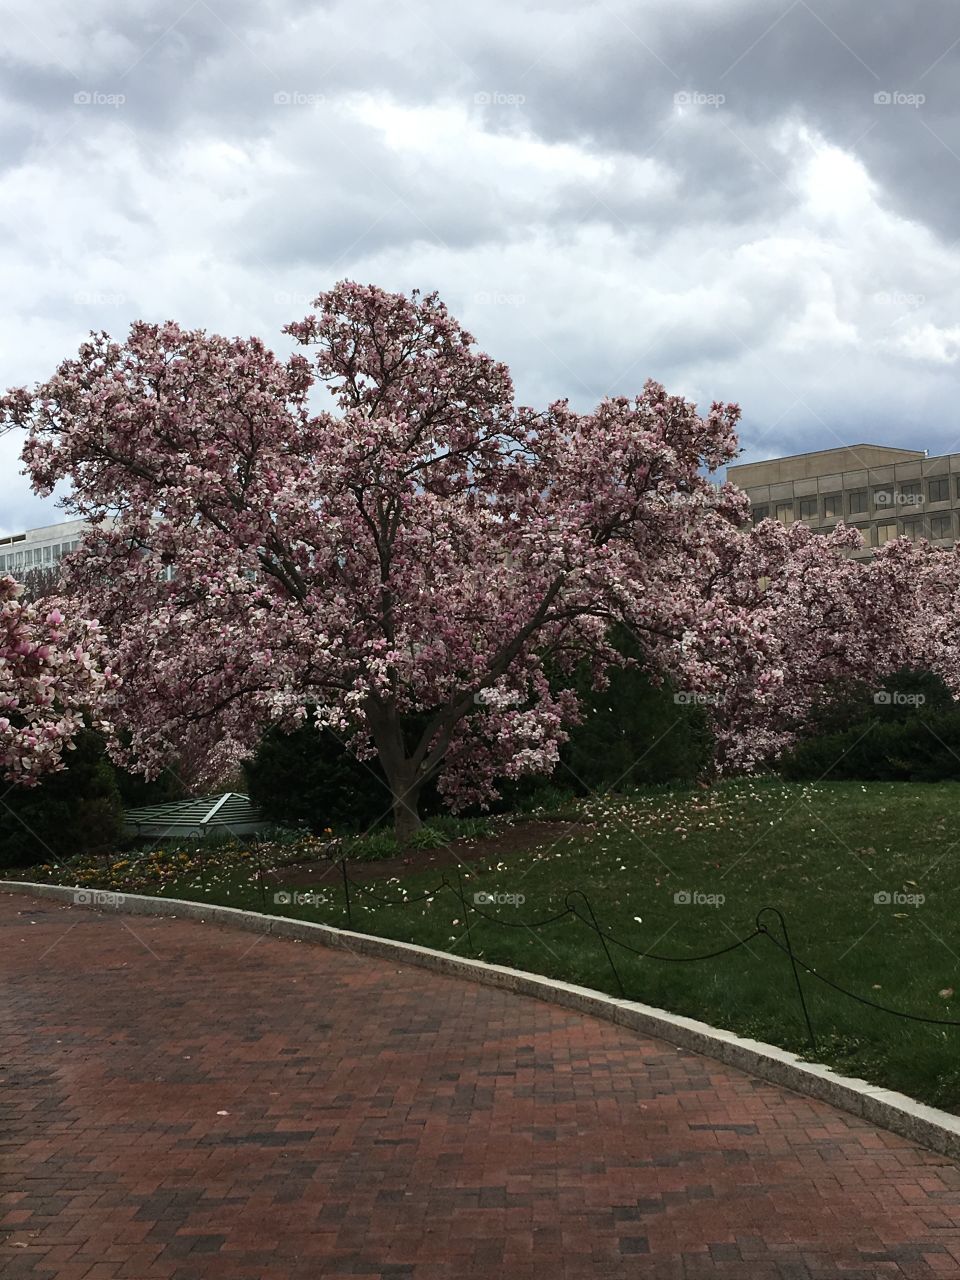 Cherry tree in a storm